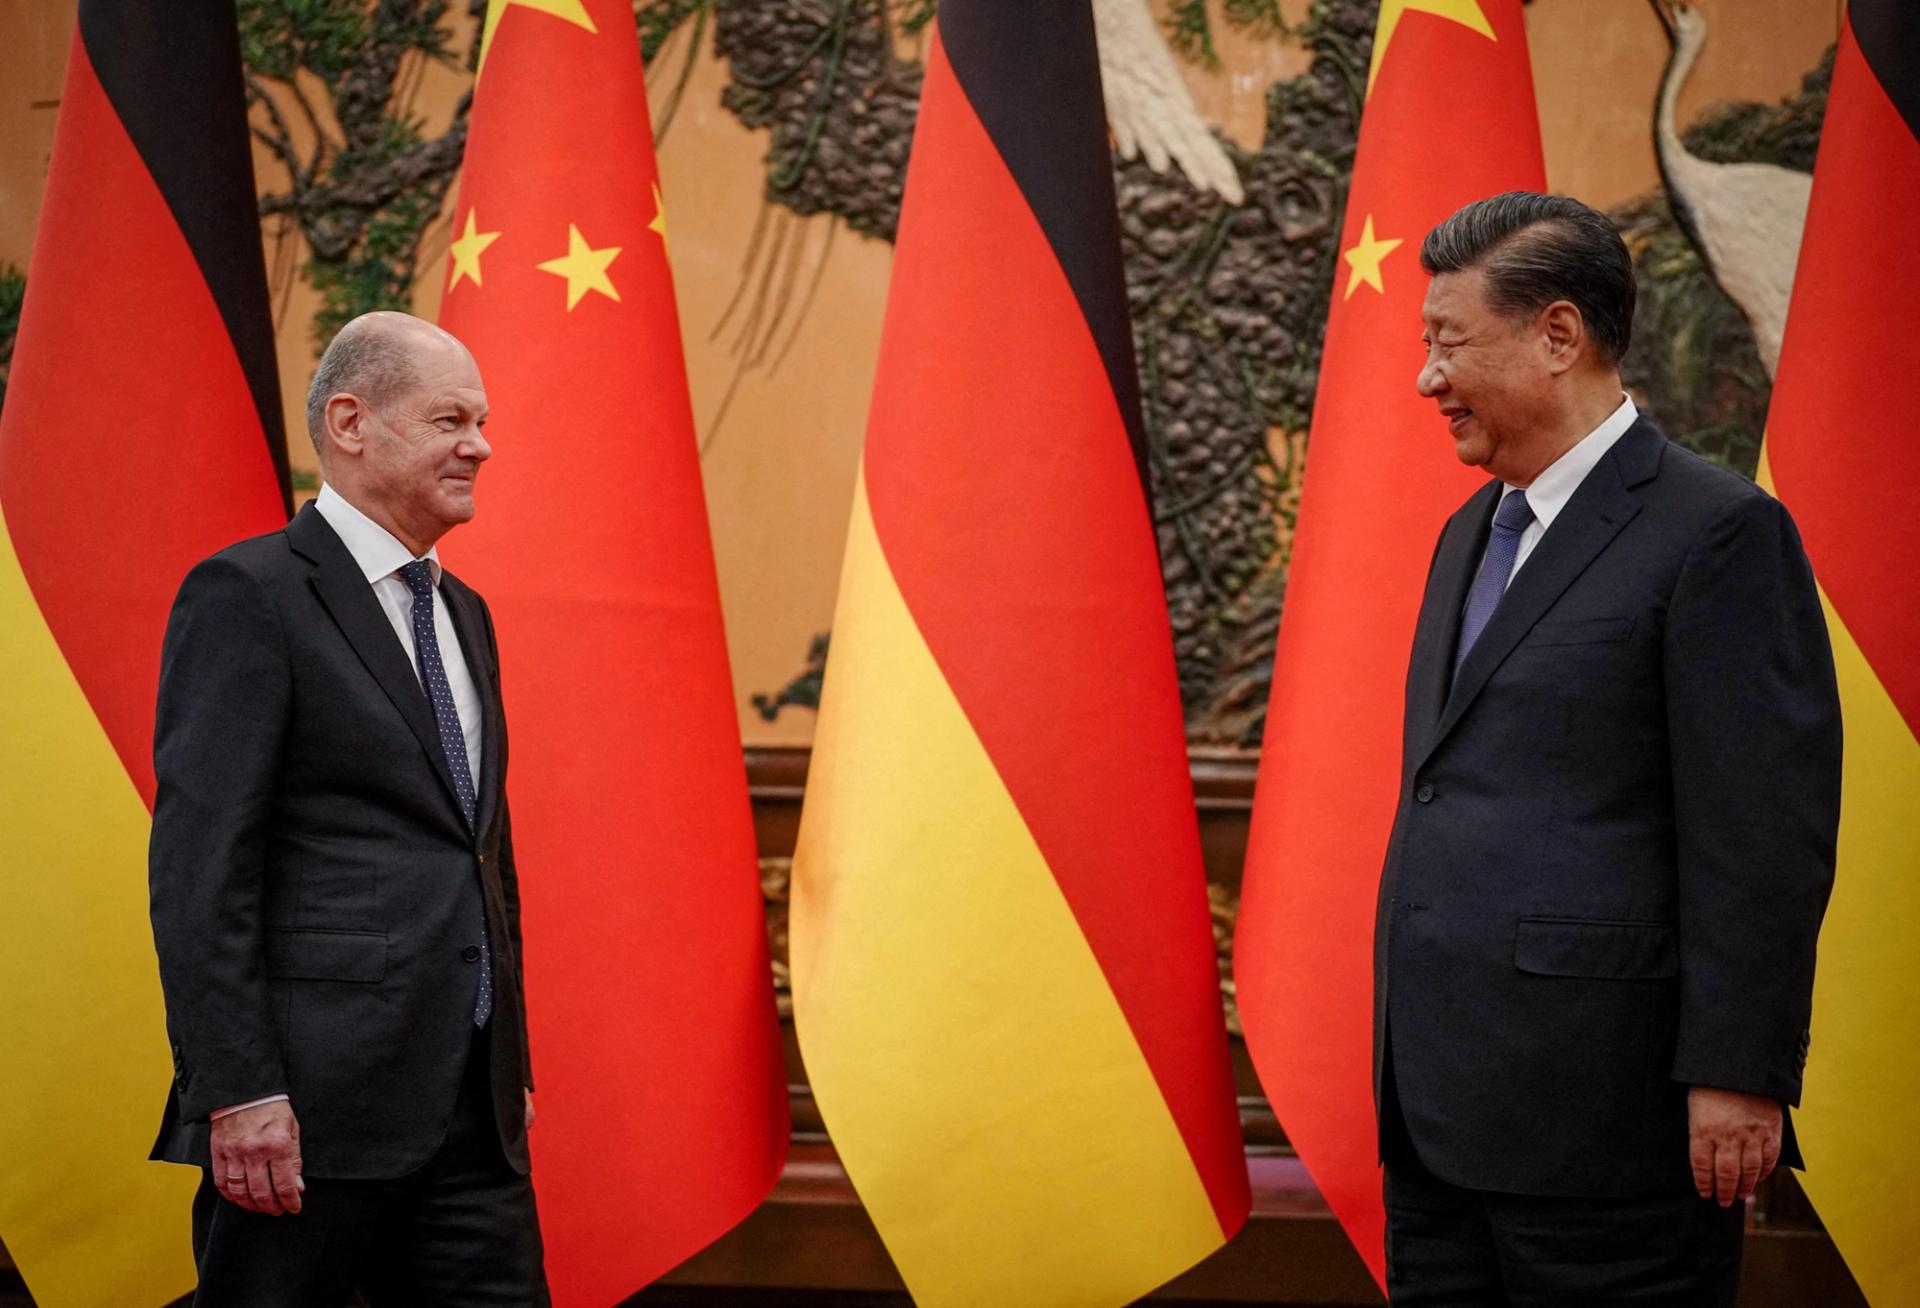 Scholz and Xi